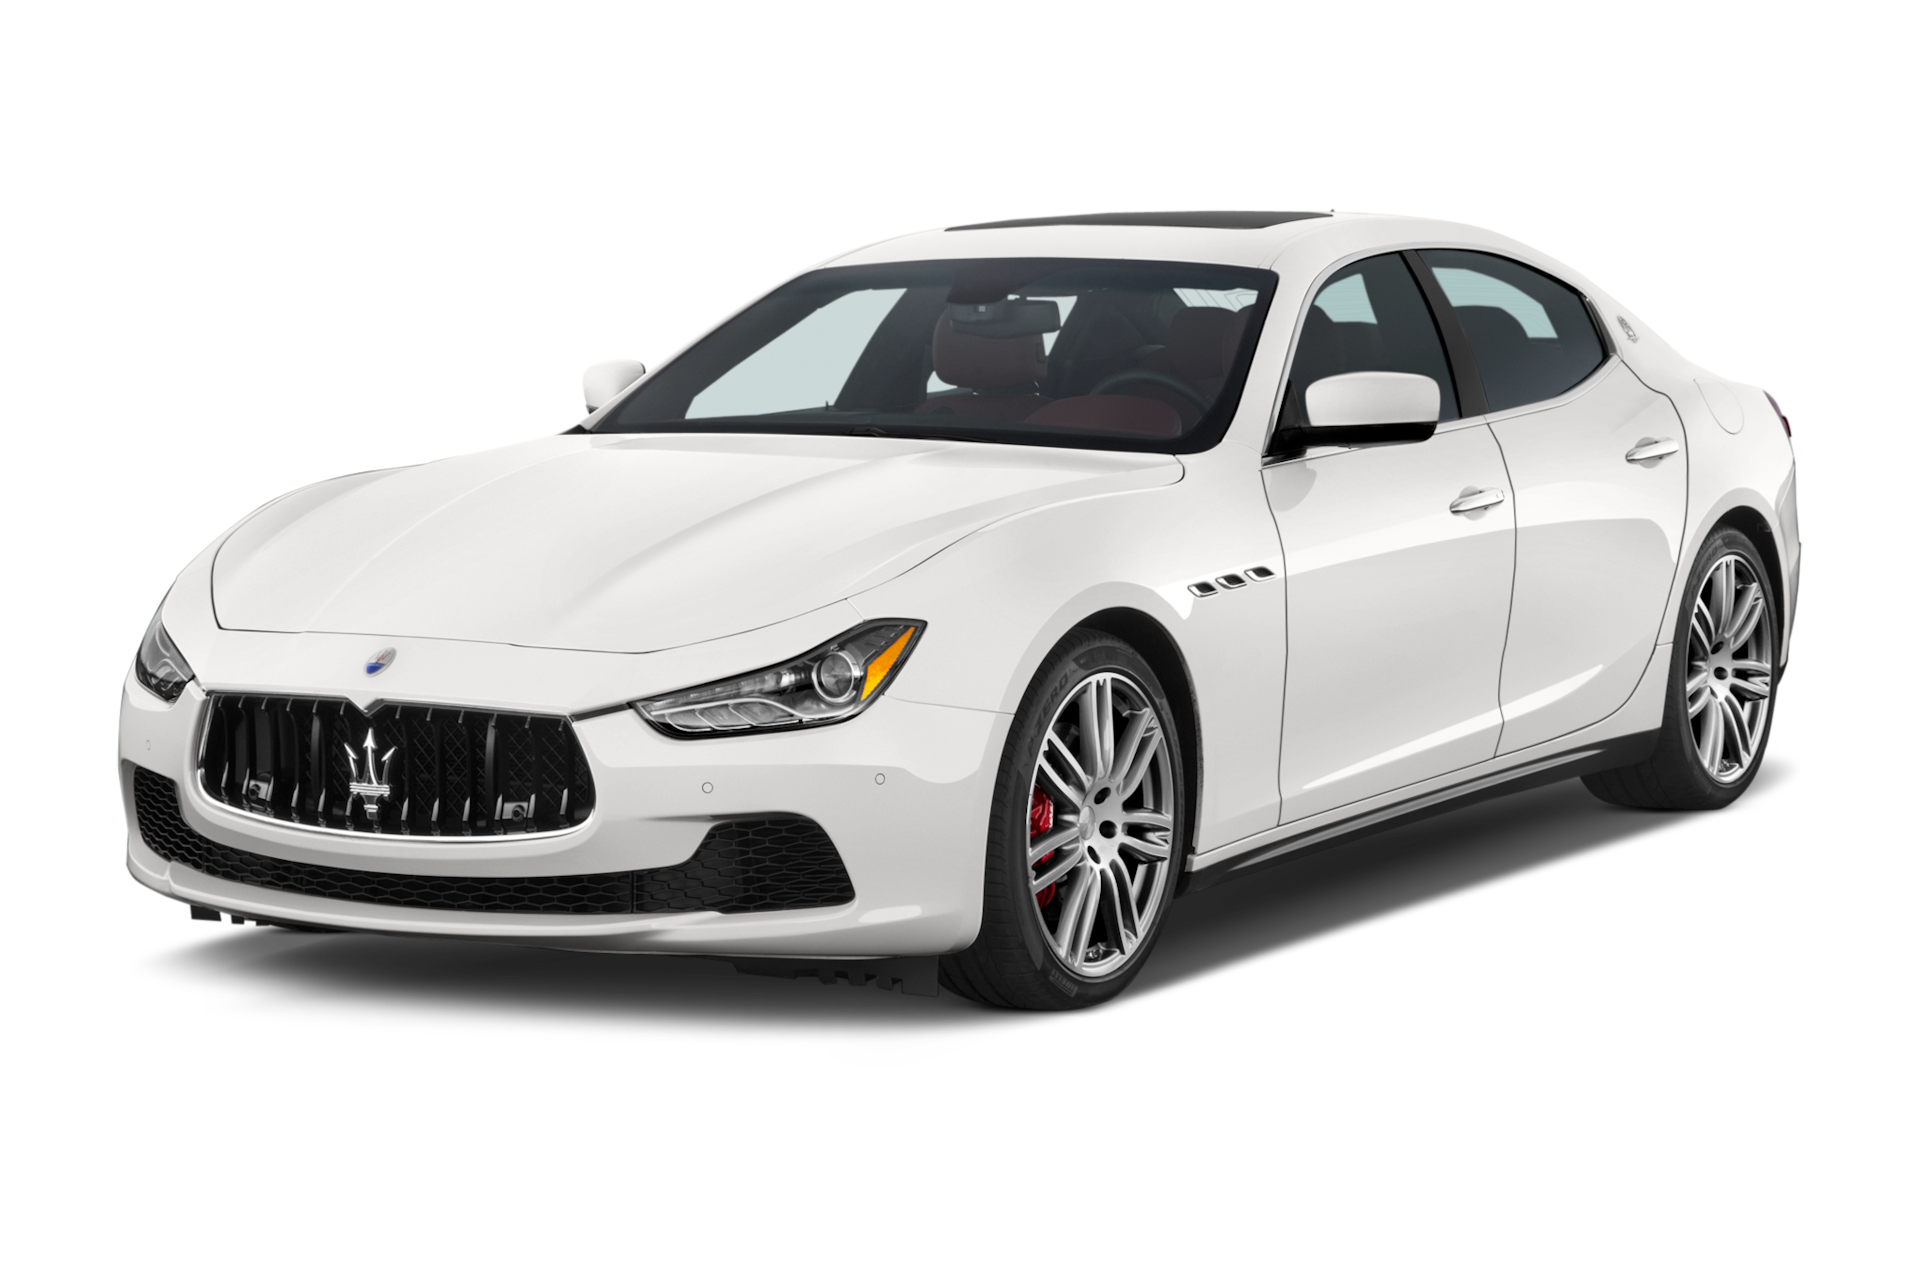 2015 Maserati Ghibli Prices, Reviews, and Photos - MotorTrend